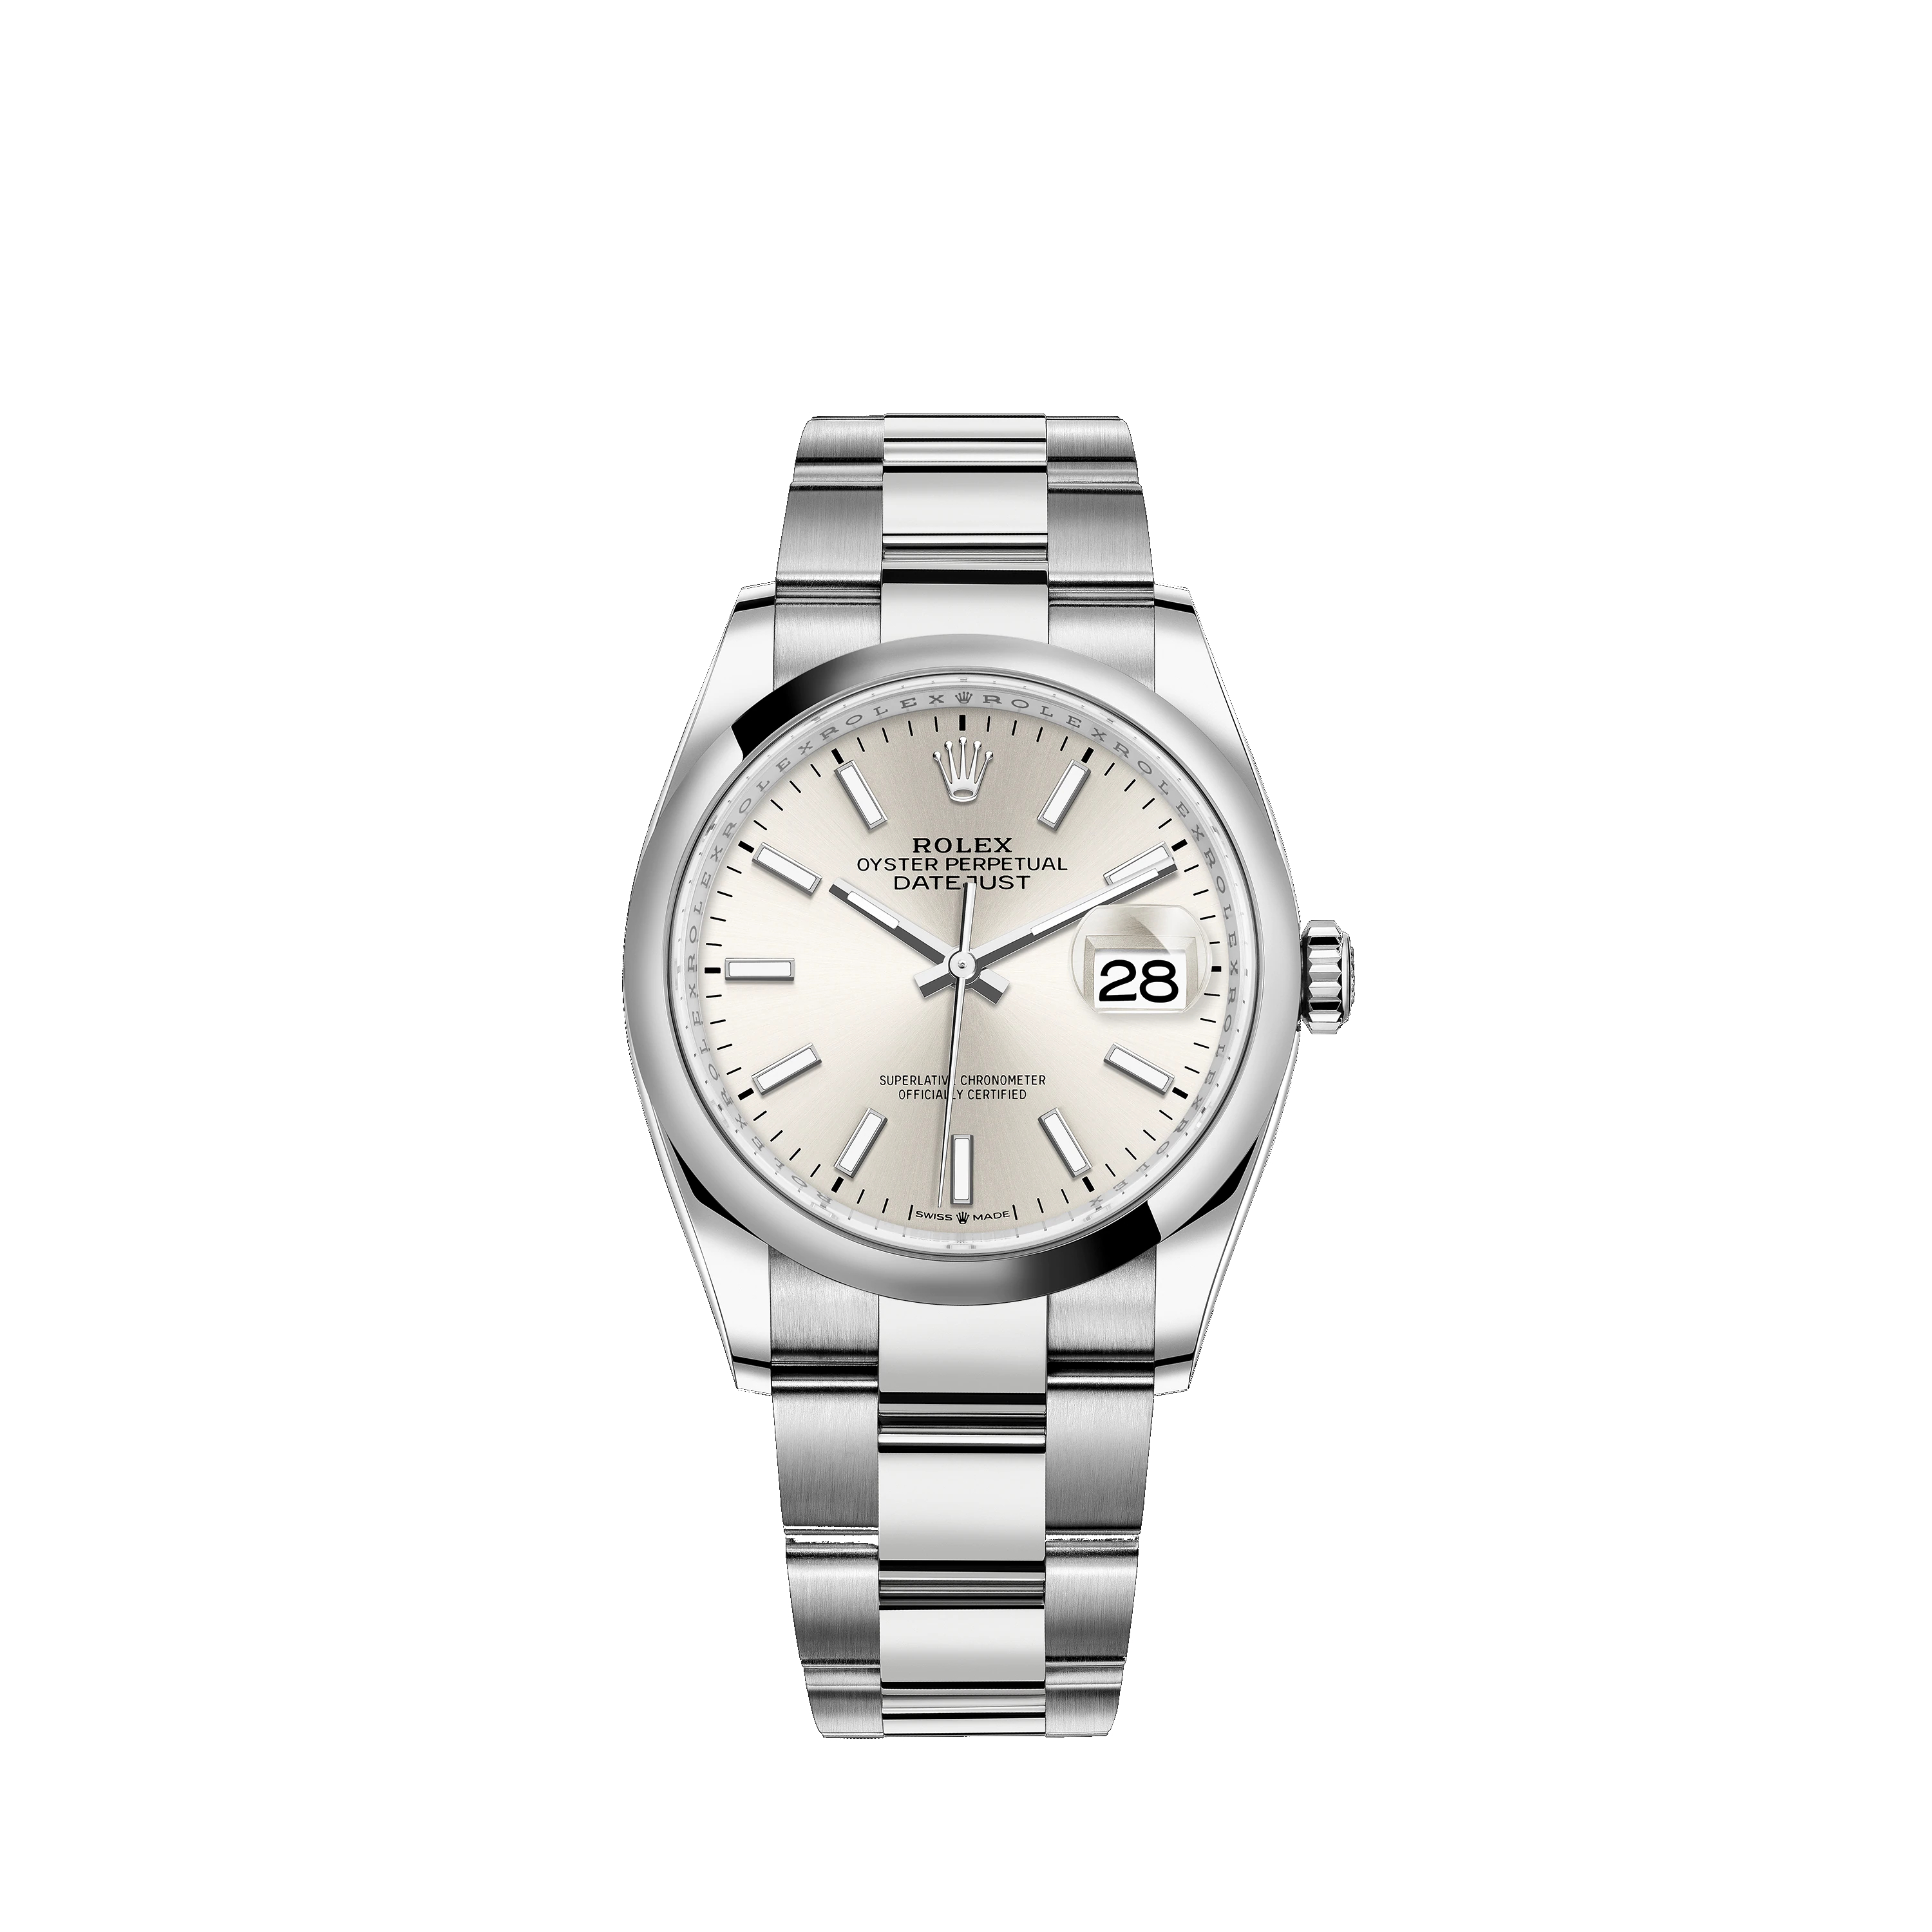 Datejust 36 126200 Stainless Steel Watch (Silver)